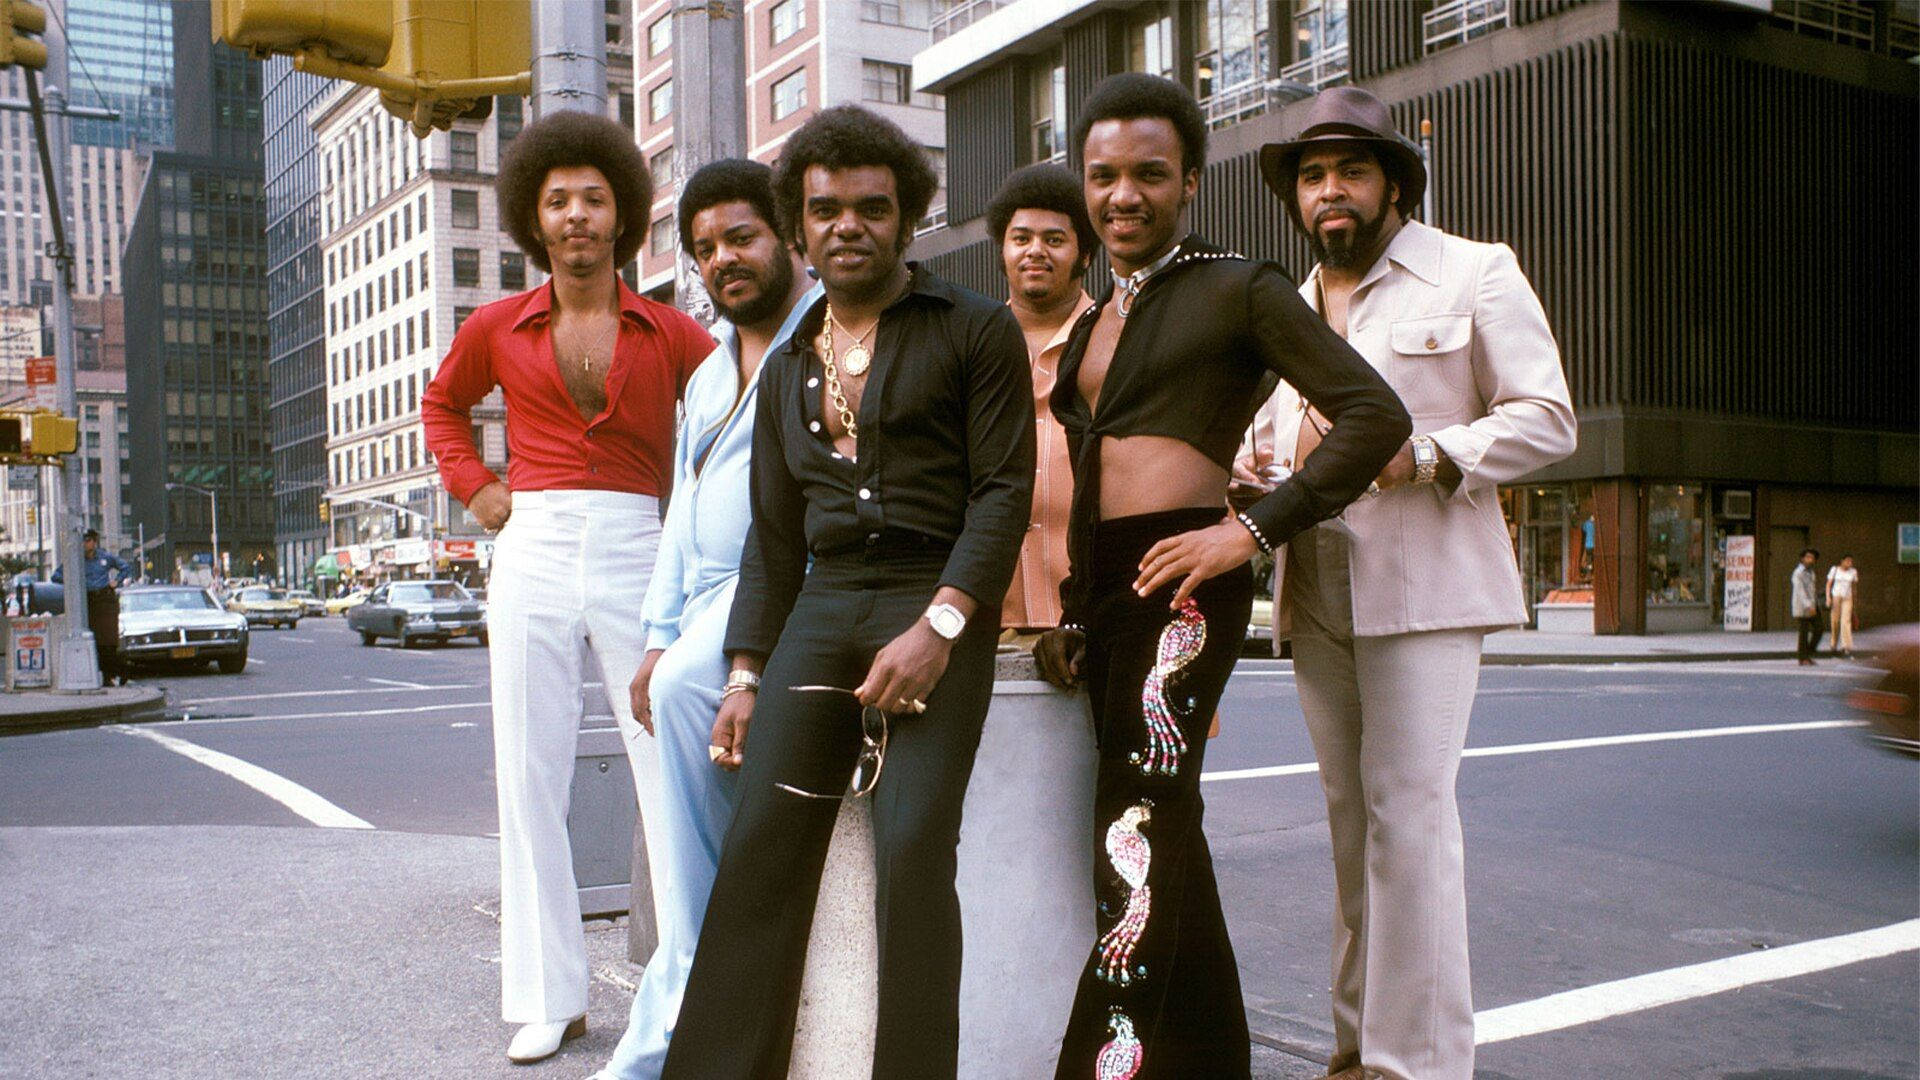 Iconic Street Portrait of The Isley Brothers from 1975 Wallpaper